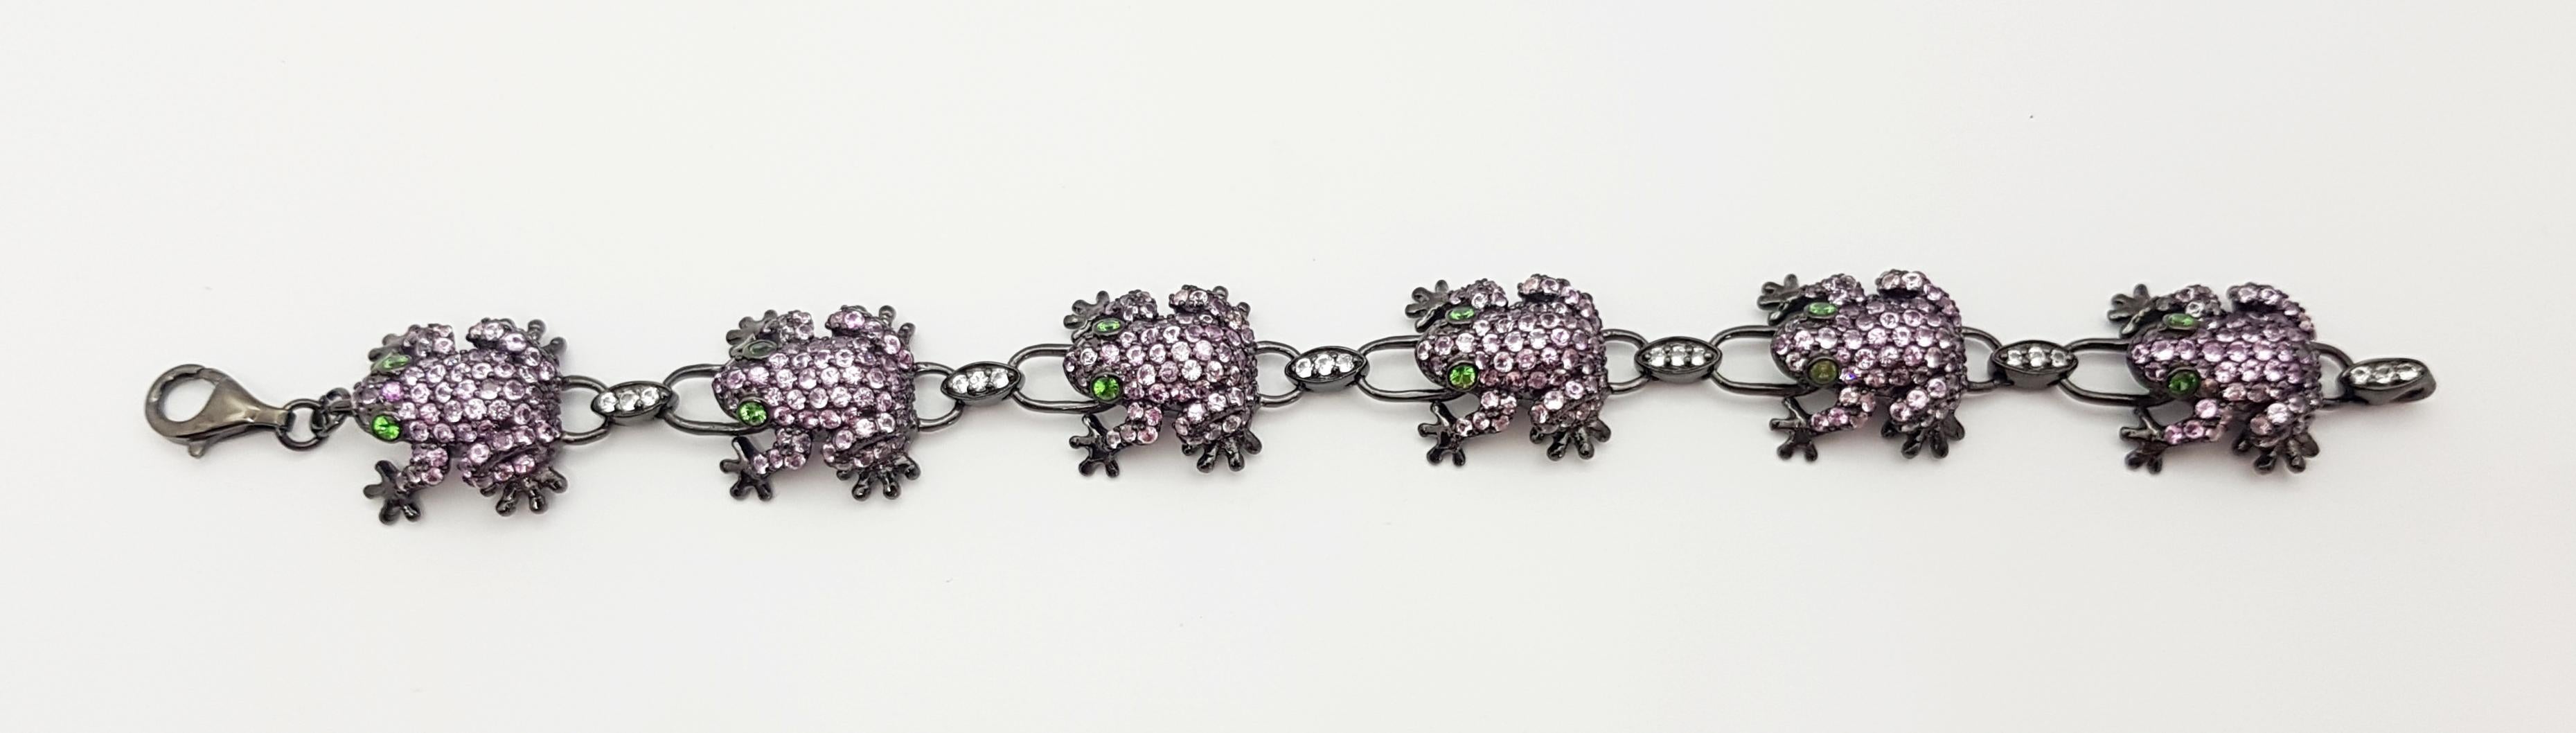 Pink Sapphire 9.93 carats, Tsavorite 0.67 carat and White Sapphire 0.44 carat Bracelet set in Silver Settings

Width:  1.8 cm 
Length: 20.0 cm
Total Weight: 29.04 grams


*Please note that the silver setting is plated with rhodium to promote shine